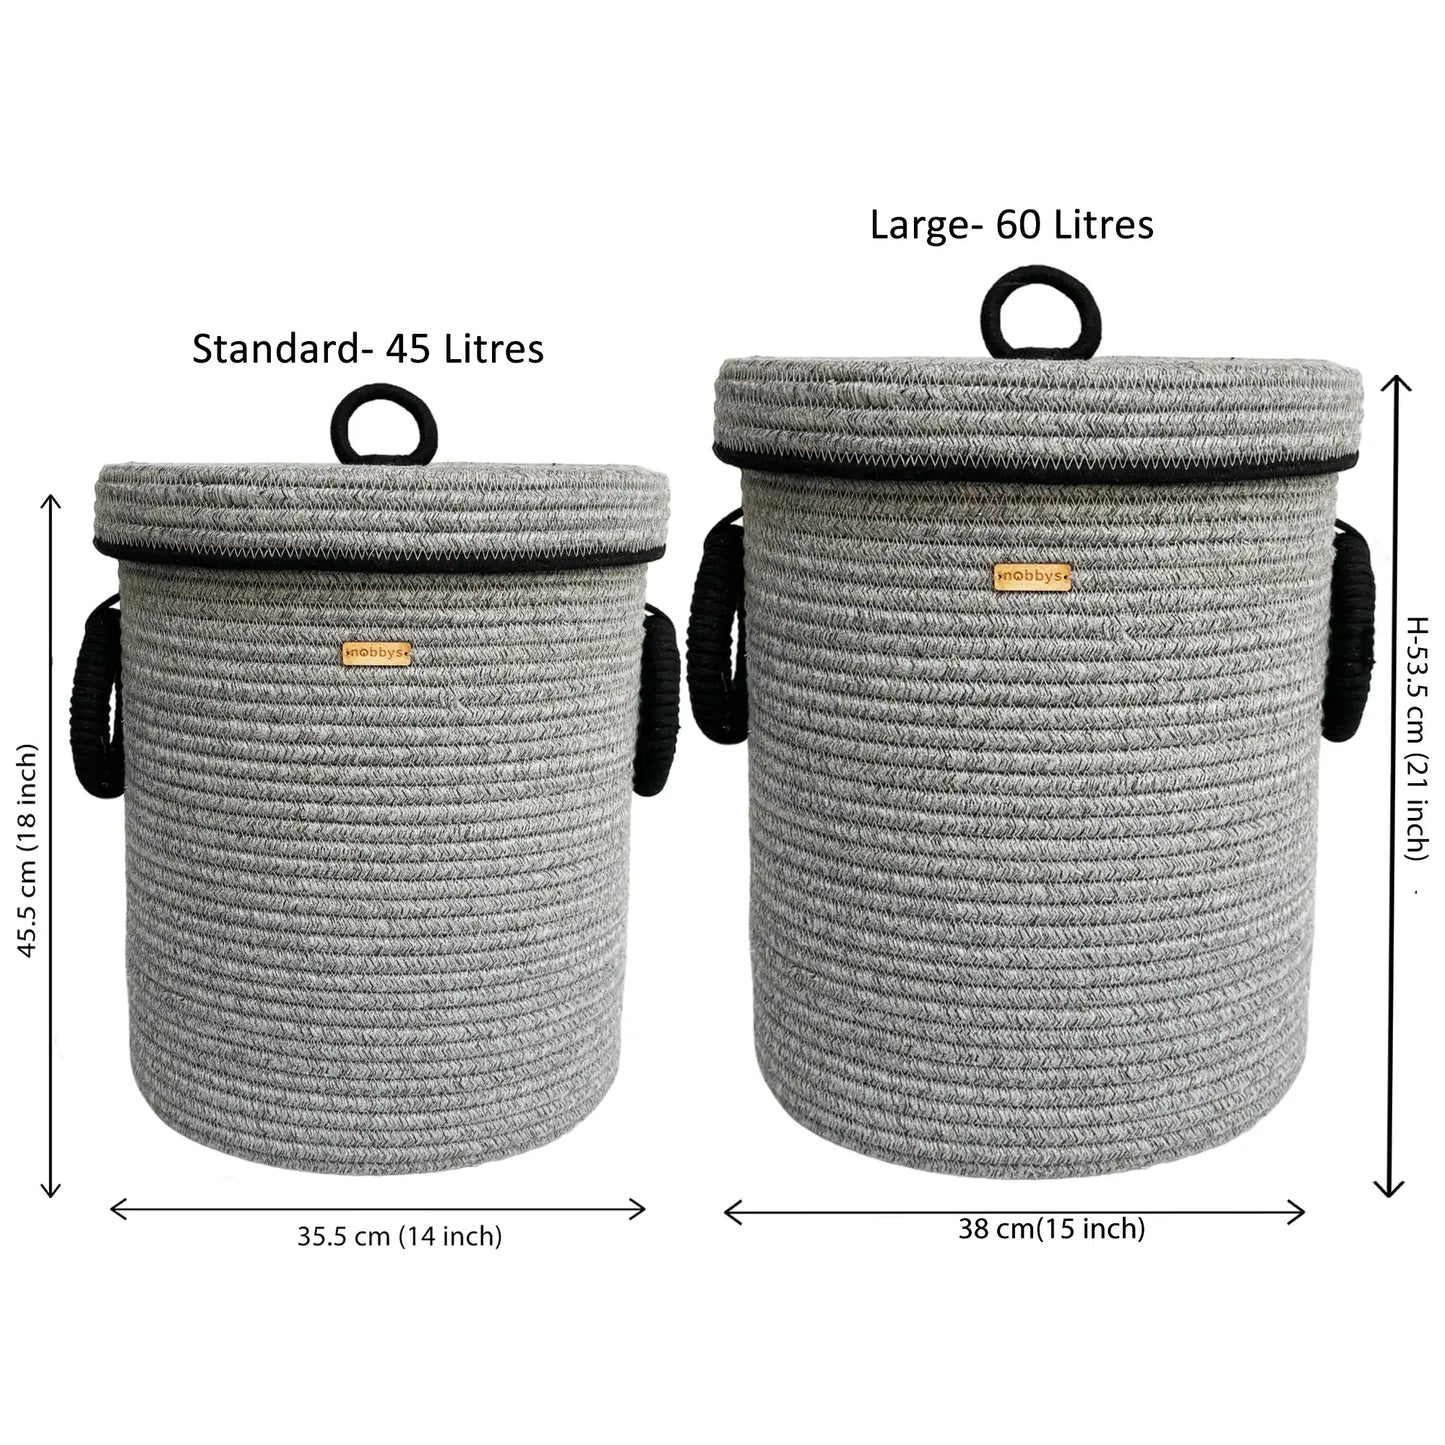 Silver Grey Laundry Basket with Lid and Bottom Spacers